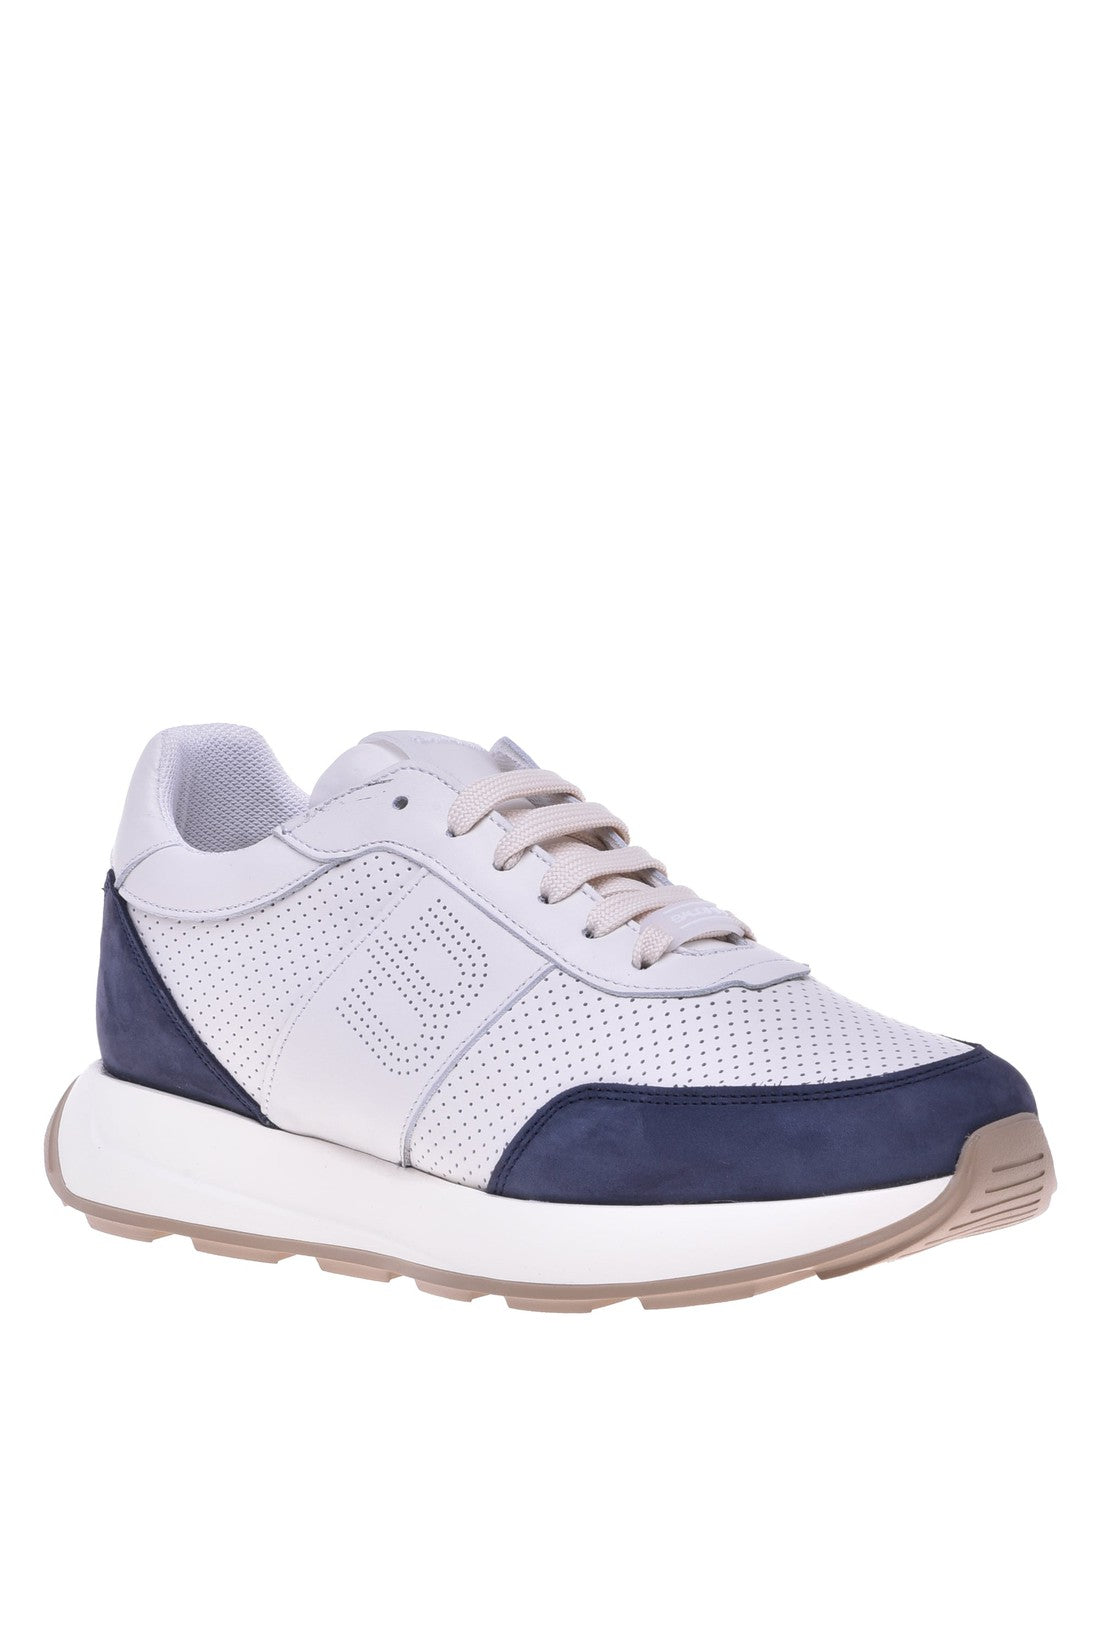 Sneaker in blue and cream perforated calfskin